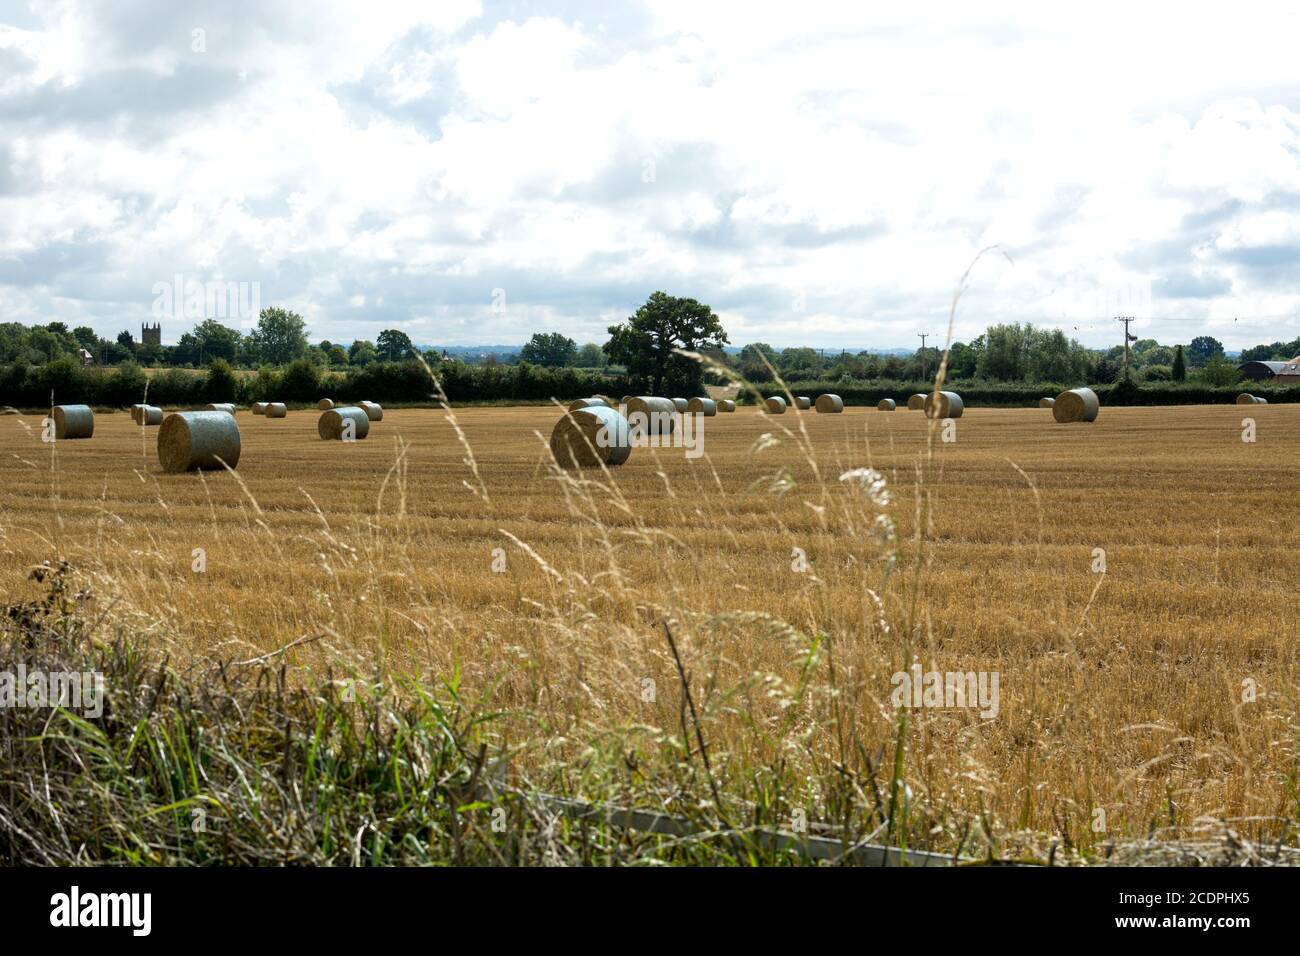 Farmland with straw bales in late summer, Warwickshire, England, UK Stock Photo